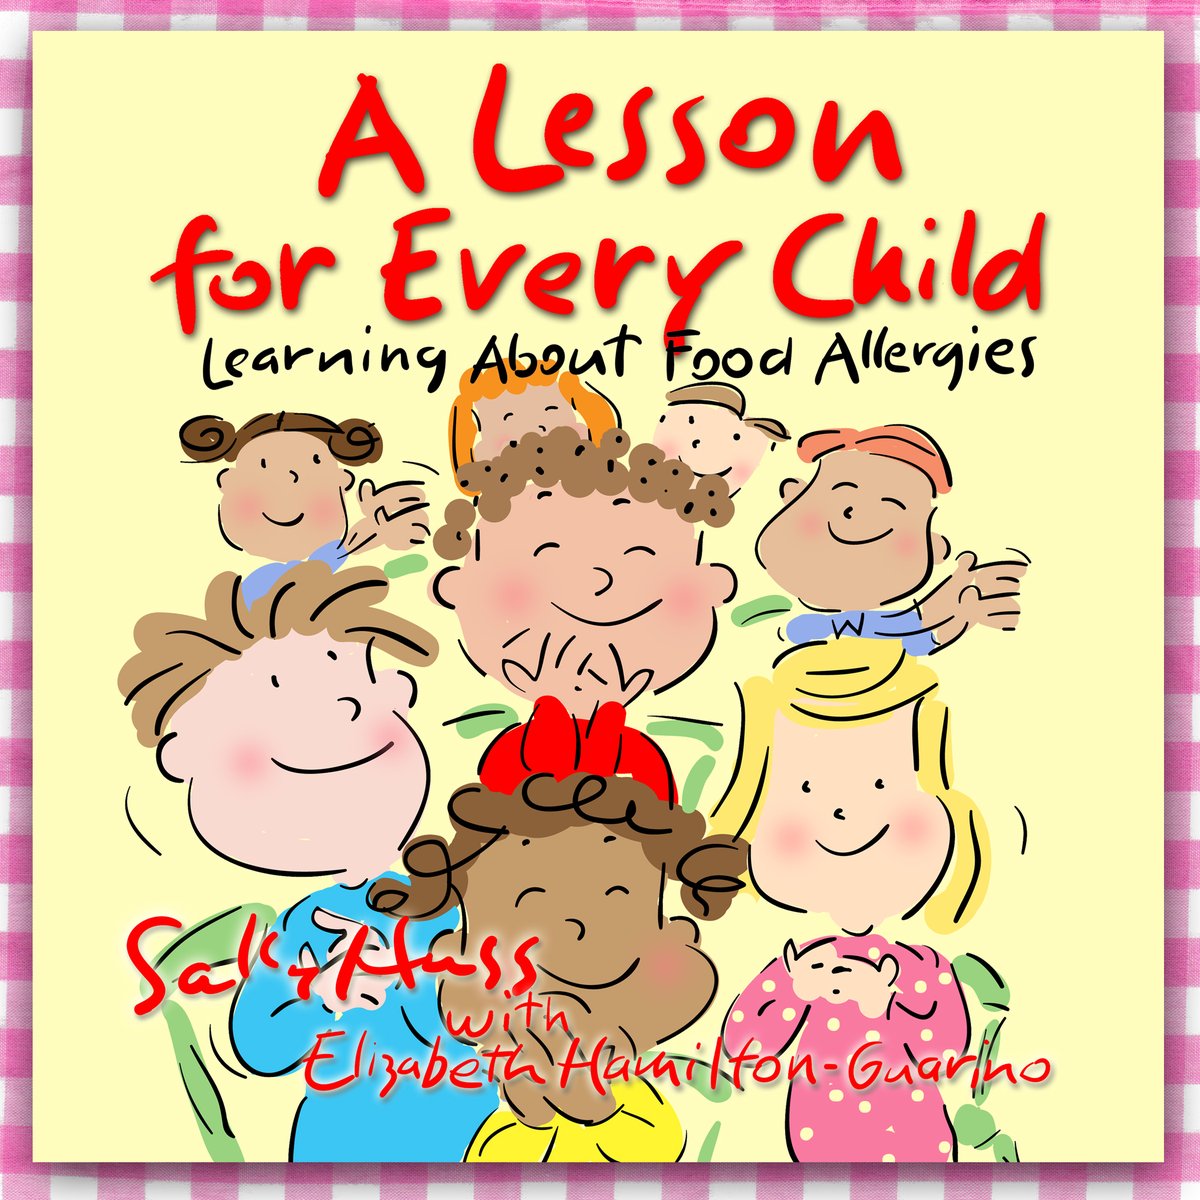 Important book for every child amzn.to/3MtNwiA #foodallergyawareness #foodallergies #kidswithfoodallergies #peanutallergy #nutallergy #food #foodallergy #foodallergymom #foodallergylife #momlife #moms